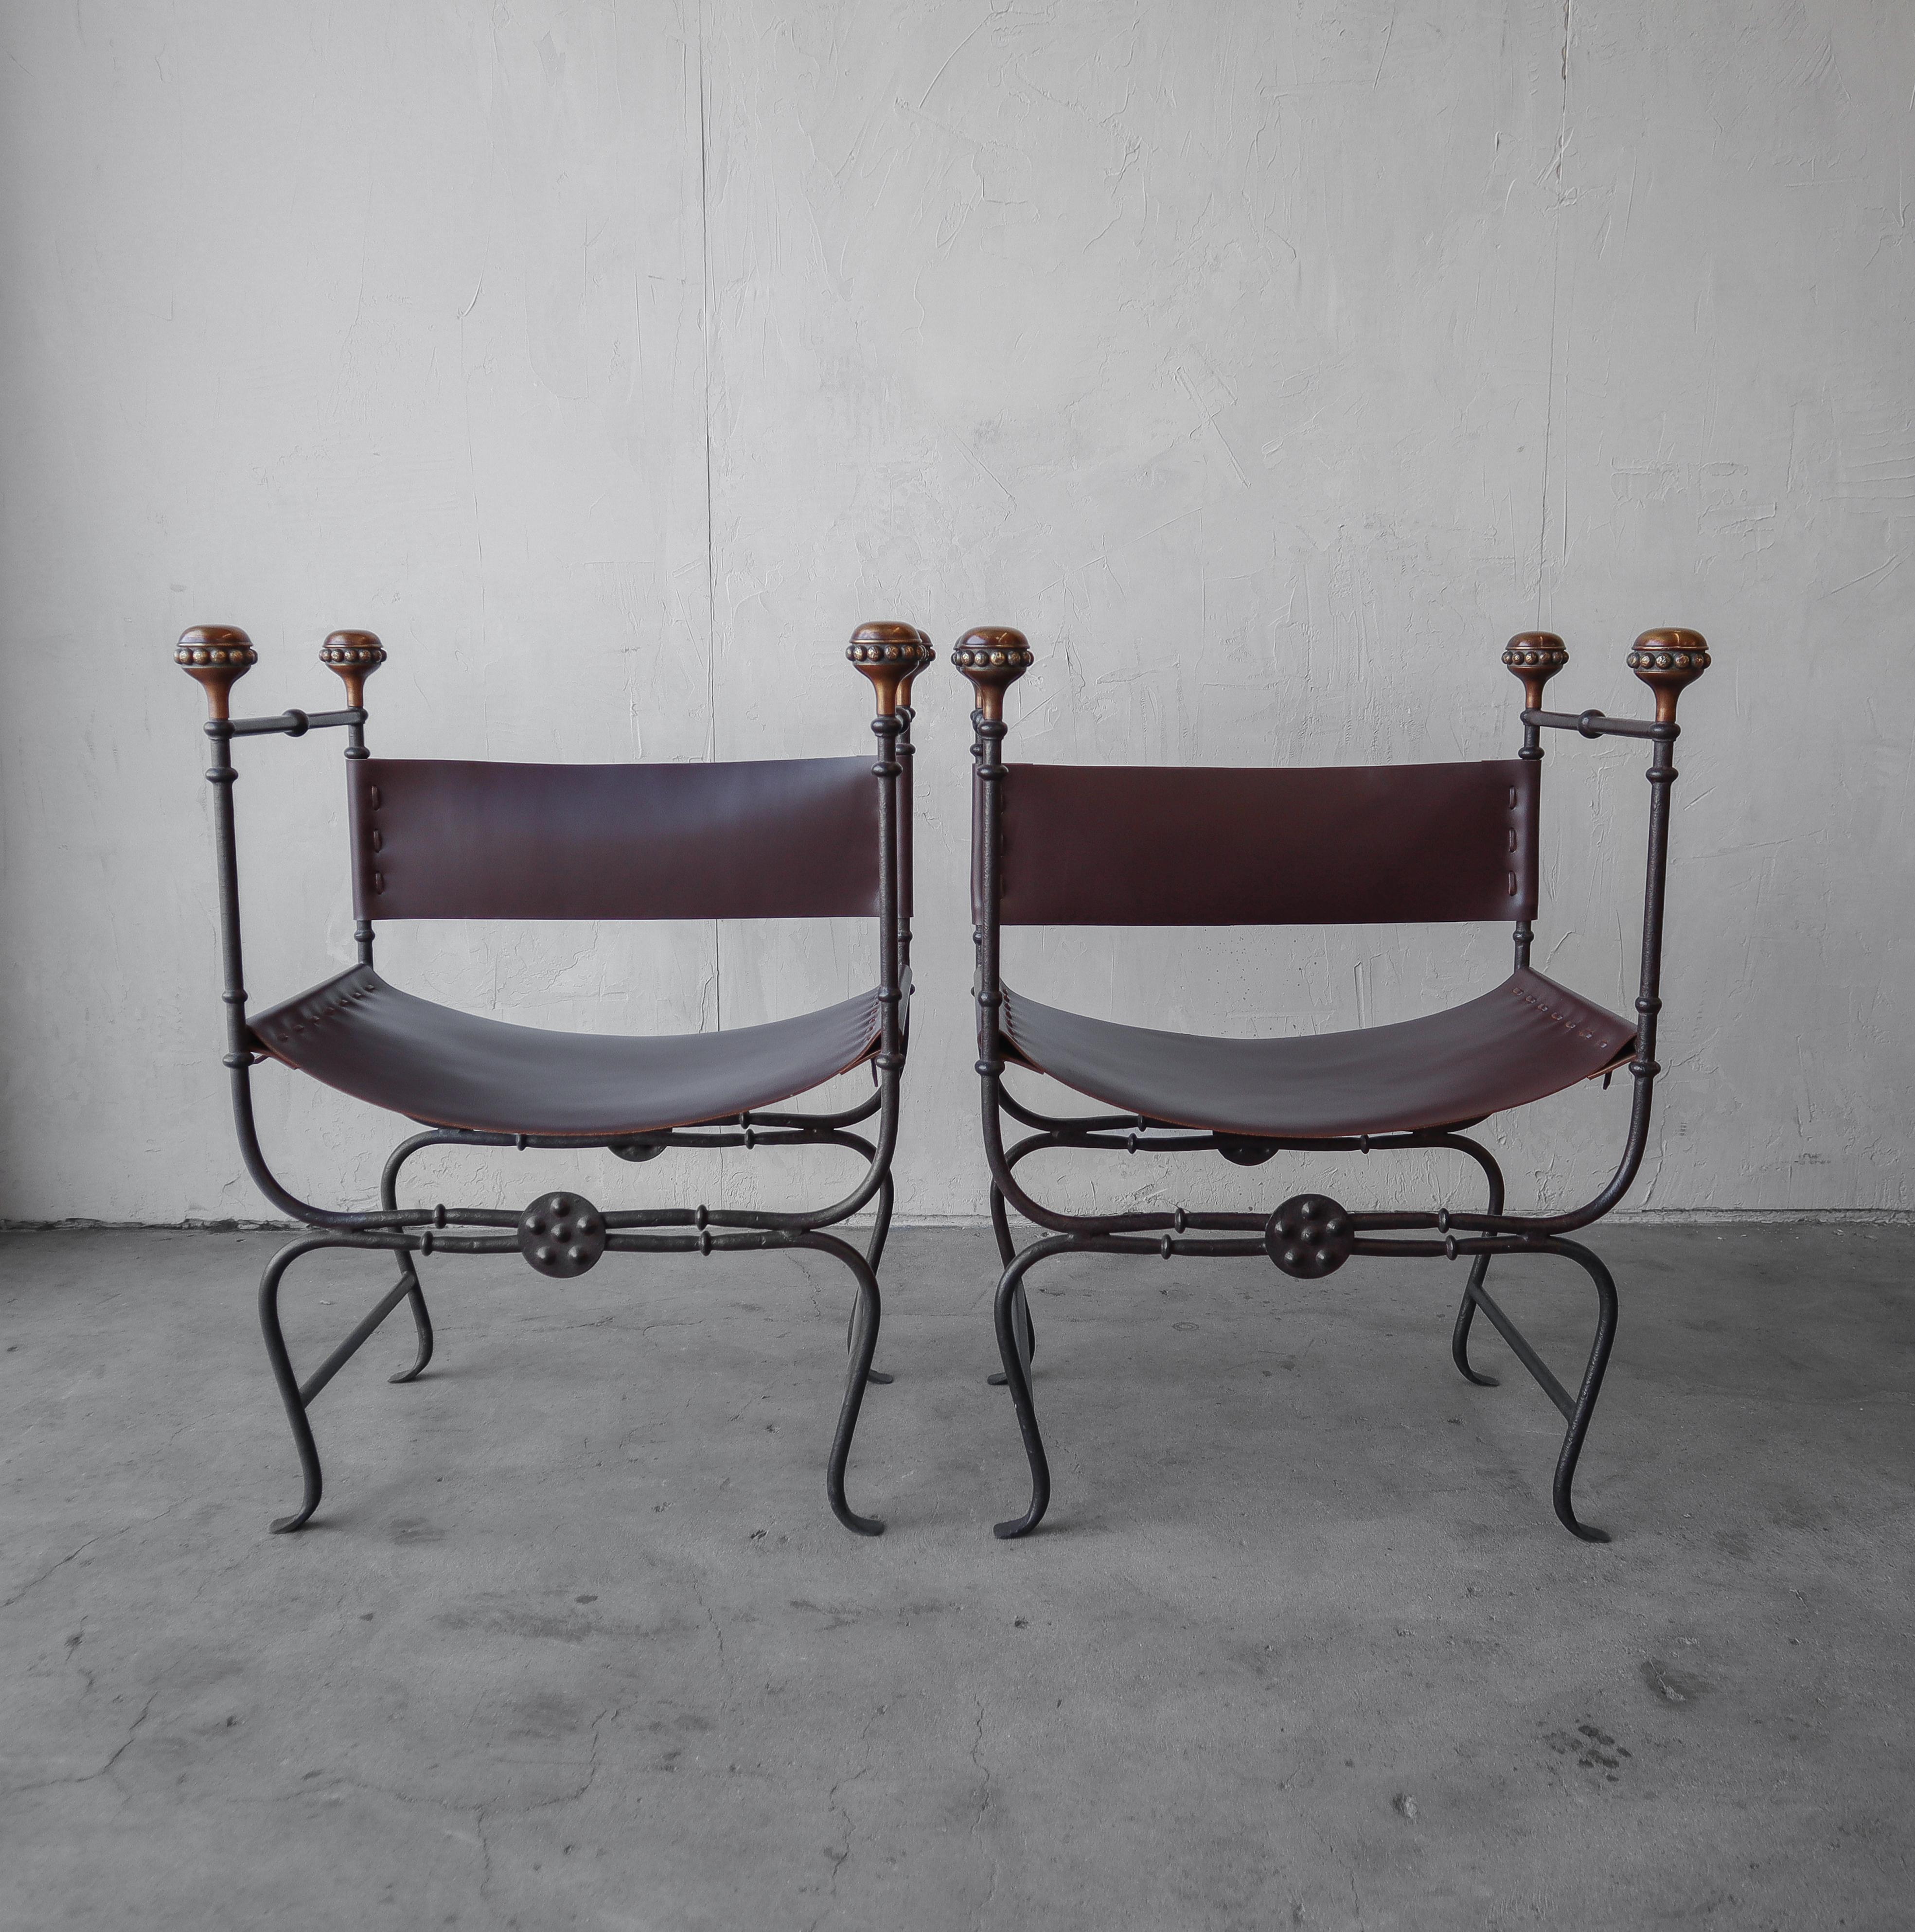 Great modern pair of iron, brass and saddle leather curule savonarola chairs. These chairs are heavy iron construction with nice patinaed brass finial details and thick leather sling seats and backs.

Chairs are in excellent condition with no